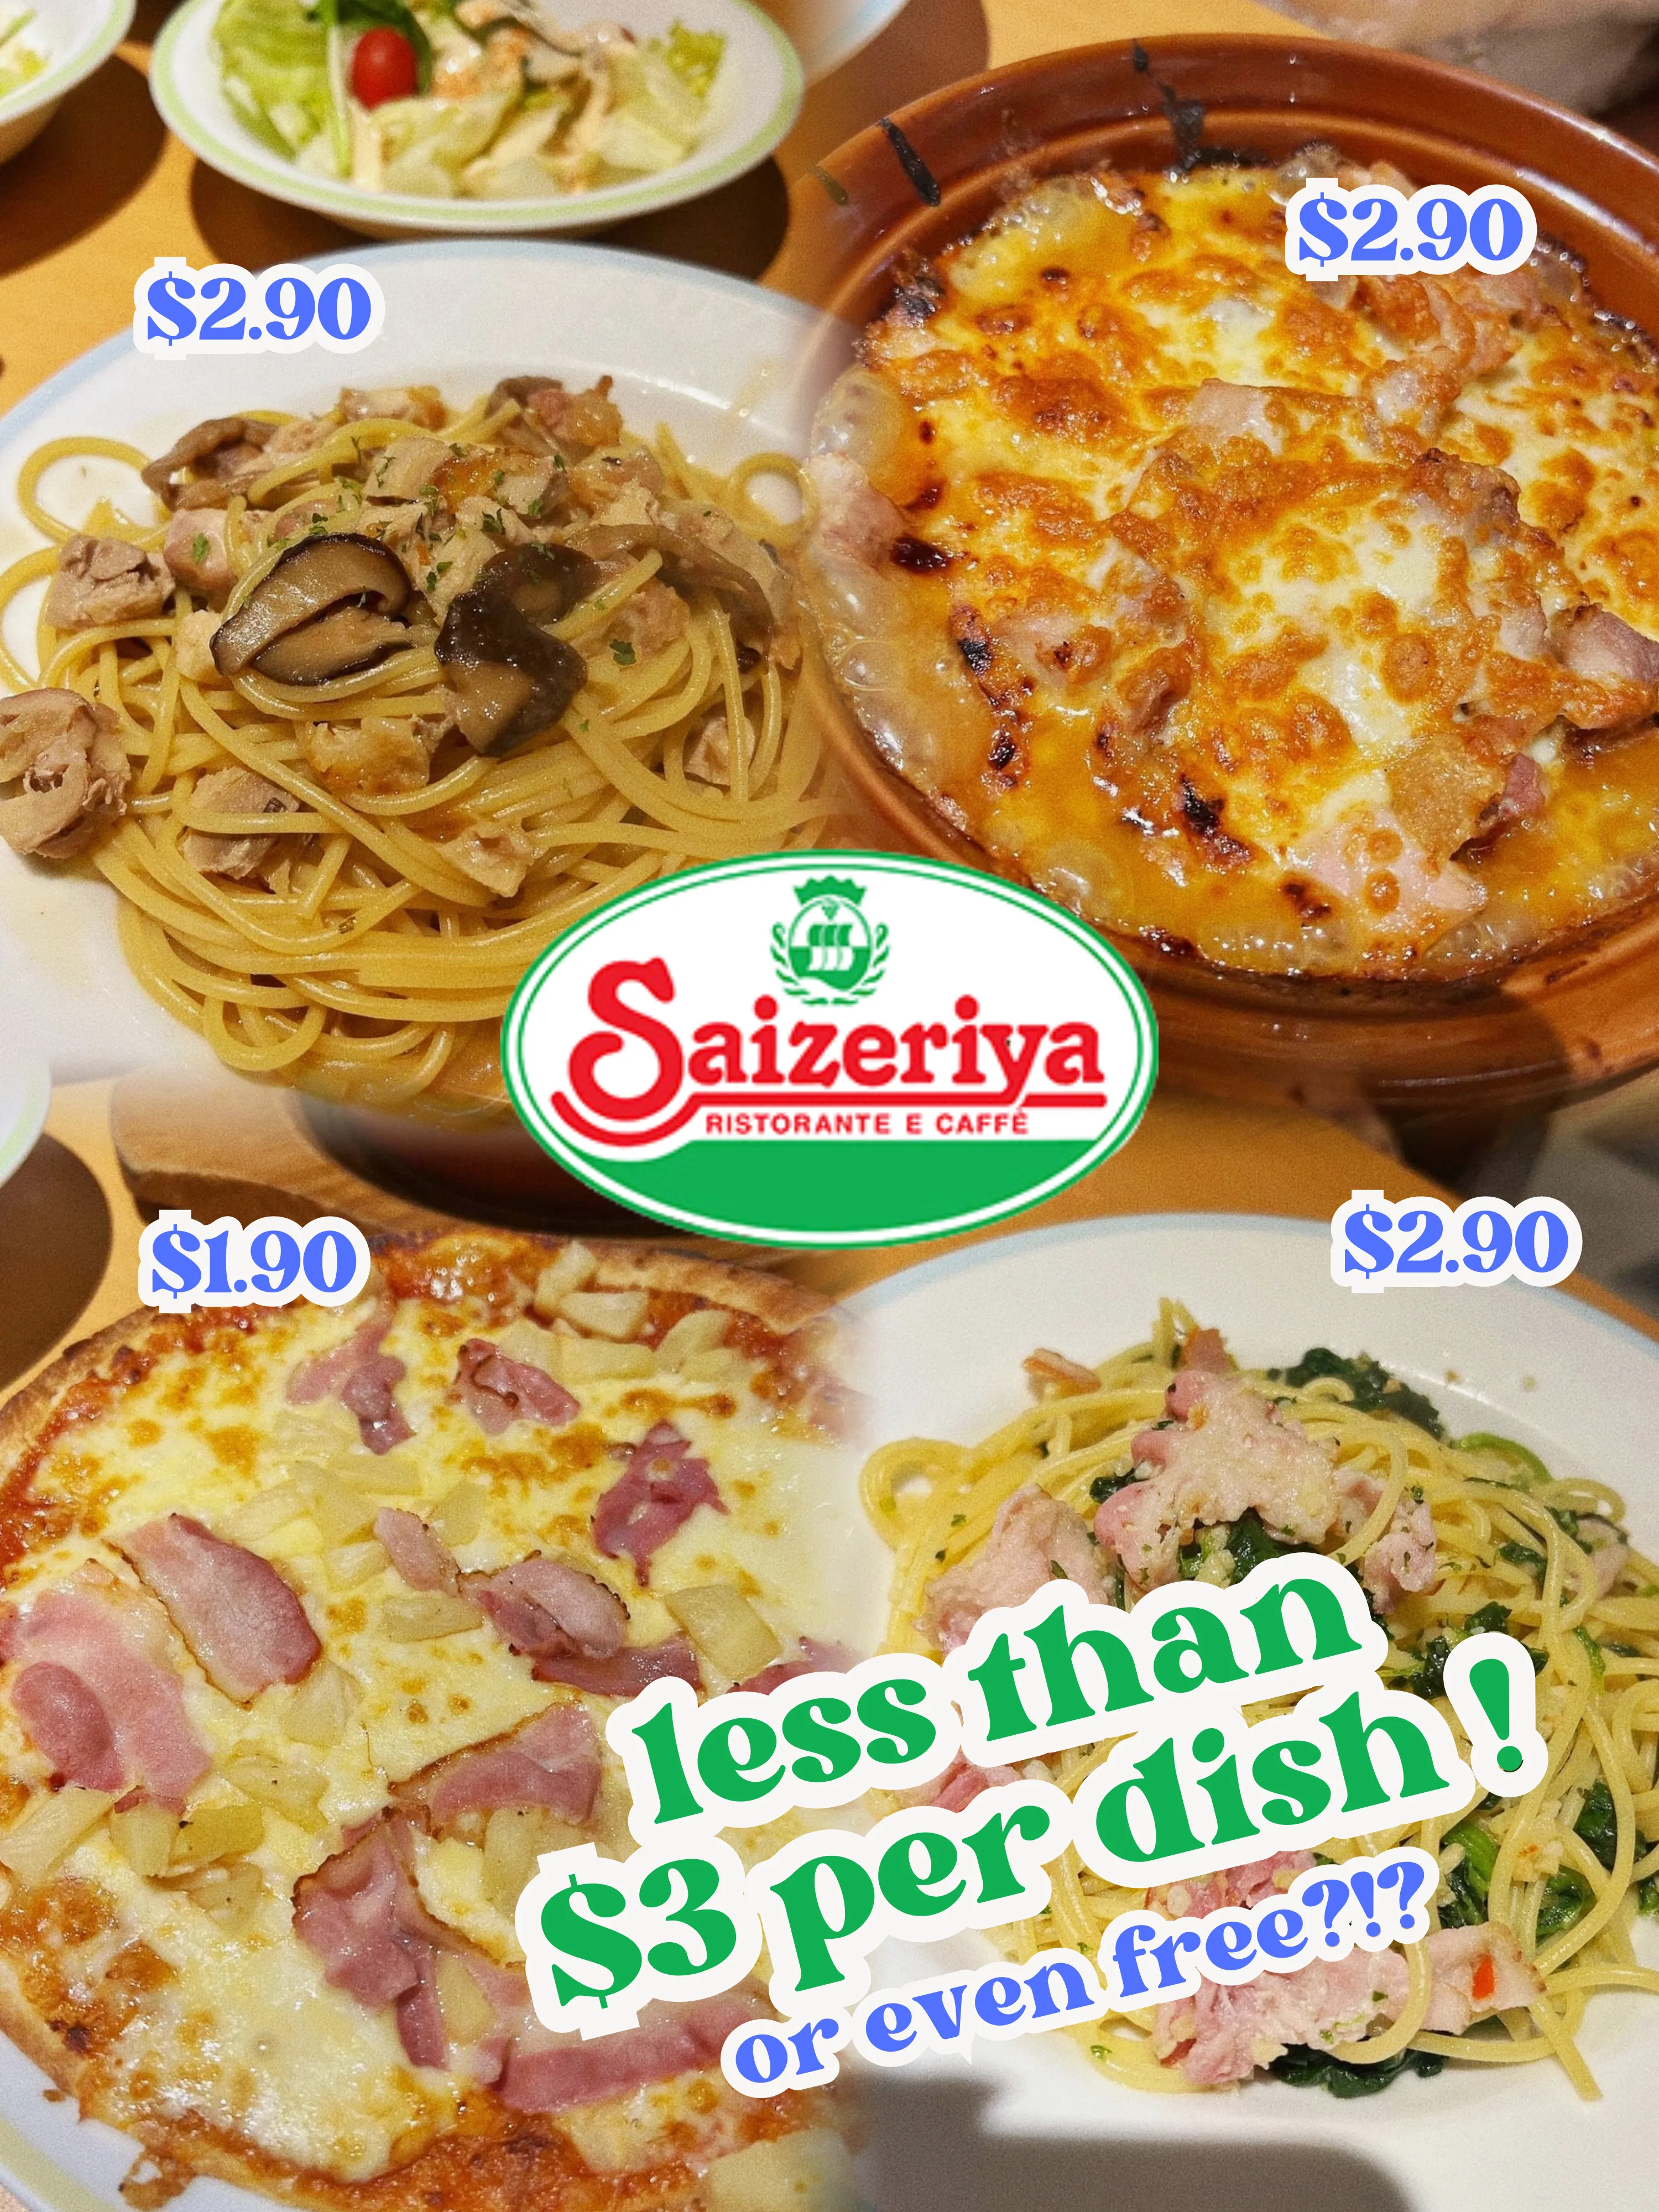 🇸🇬 how to eat Saizeriya for <$3 or even FREE!! 😋's images